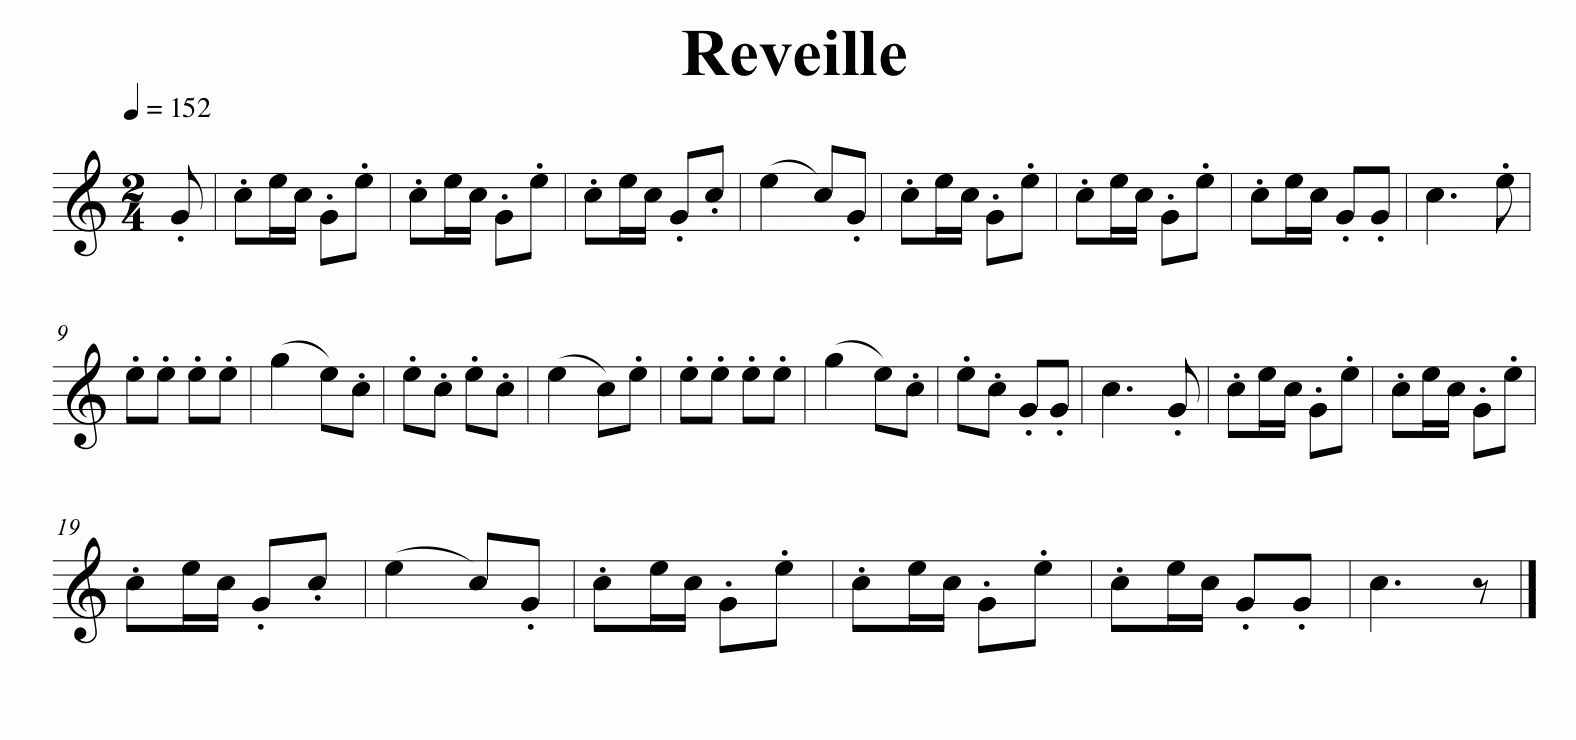 Music for the Reveille Bugle Call